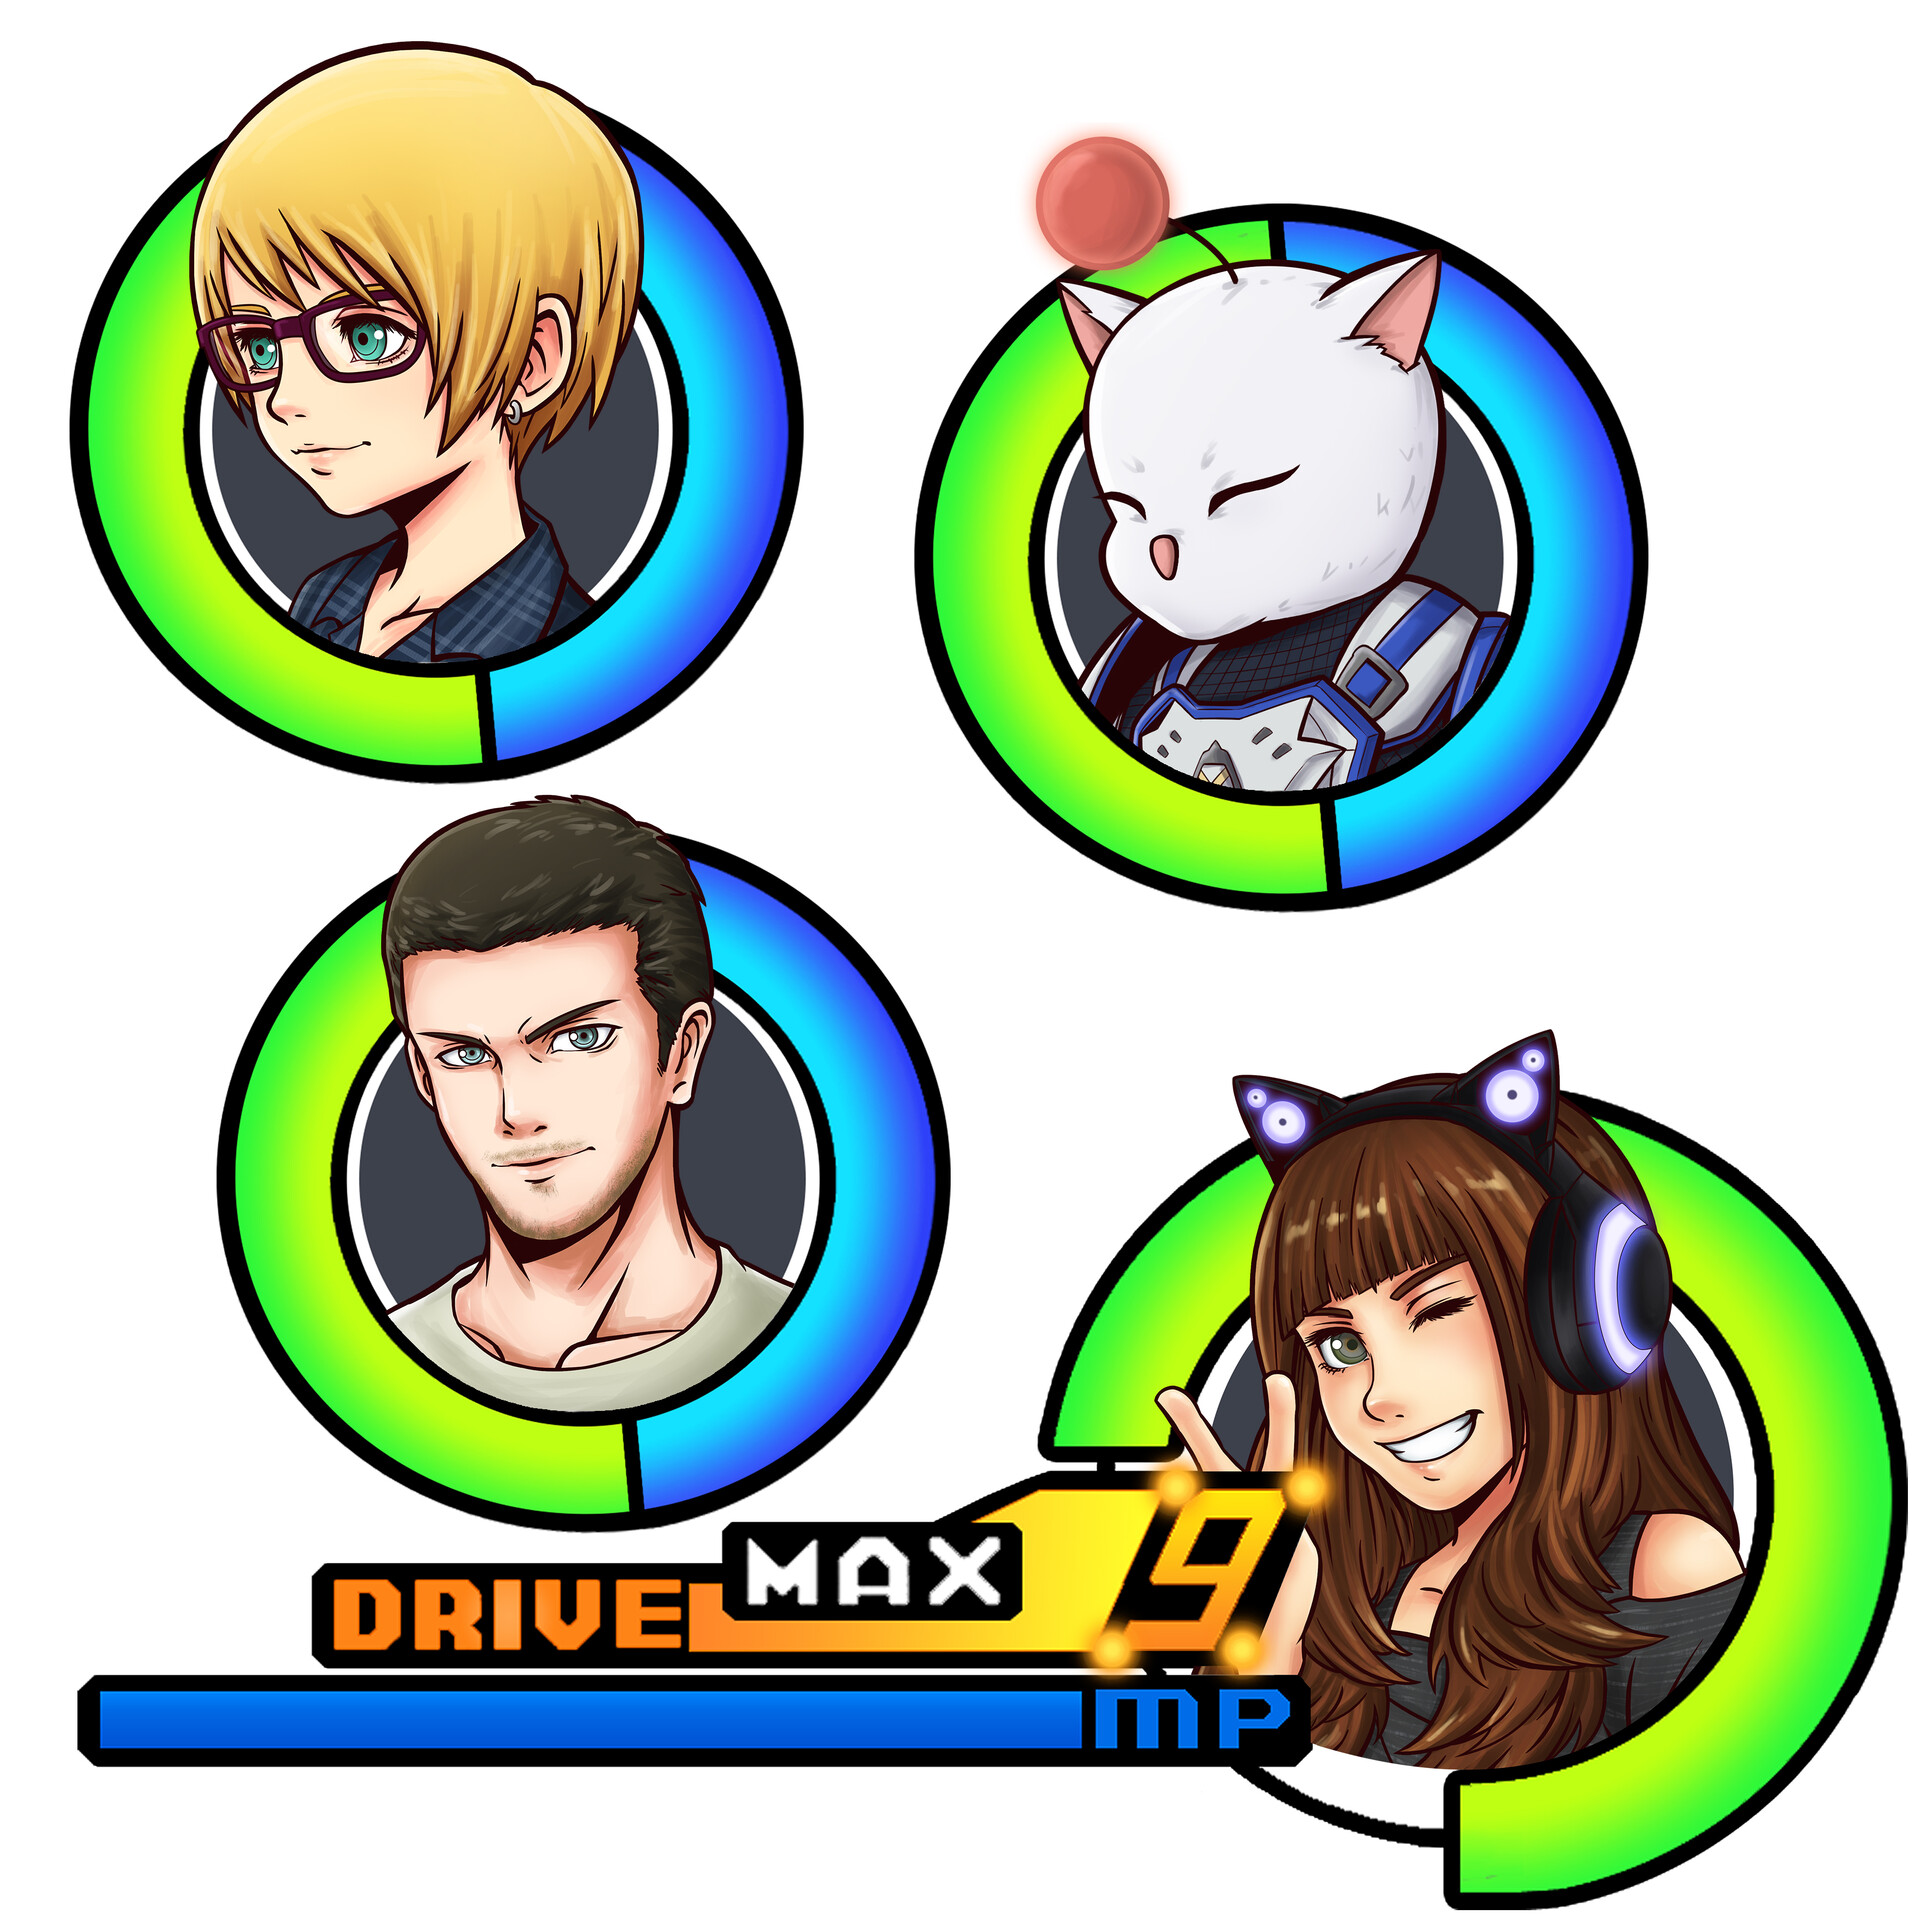 Ian Matining - Kingdom Hearts Style Avatar Commissions (Update)